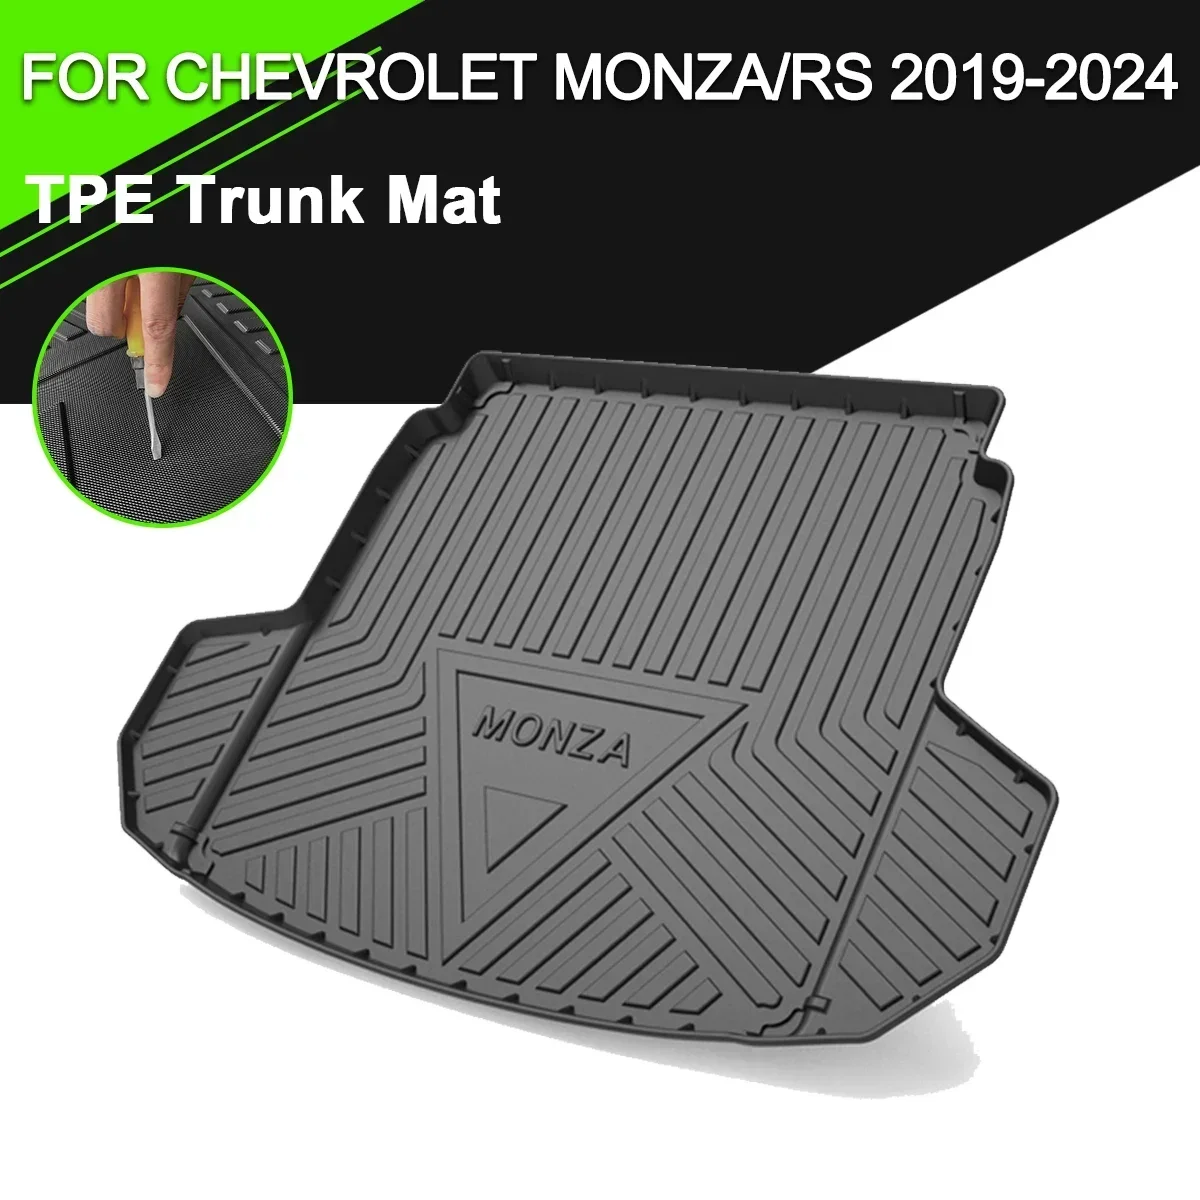 

Car Rear Trunk Cover Mat Rubber TPE Non-Slip Waterproof Cargo Liner Accessories For Chevrolet Monza/Monza RS 2019-2024